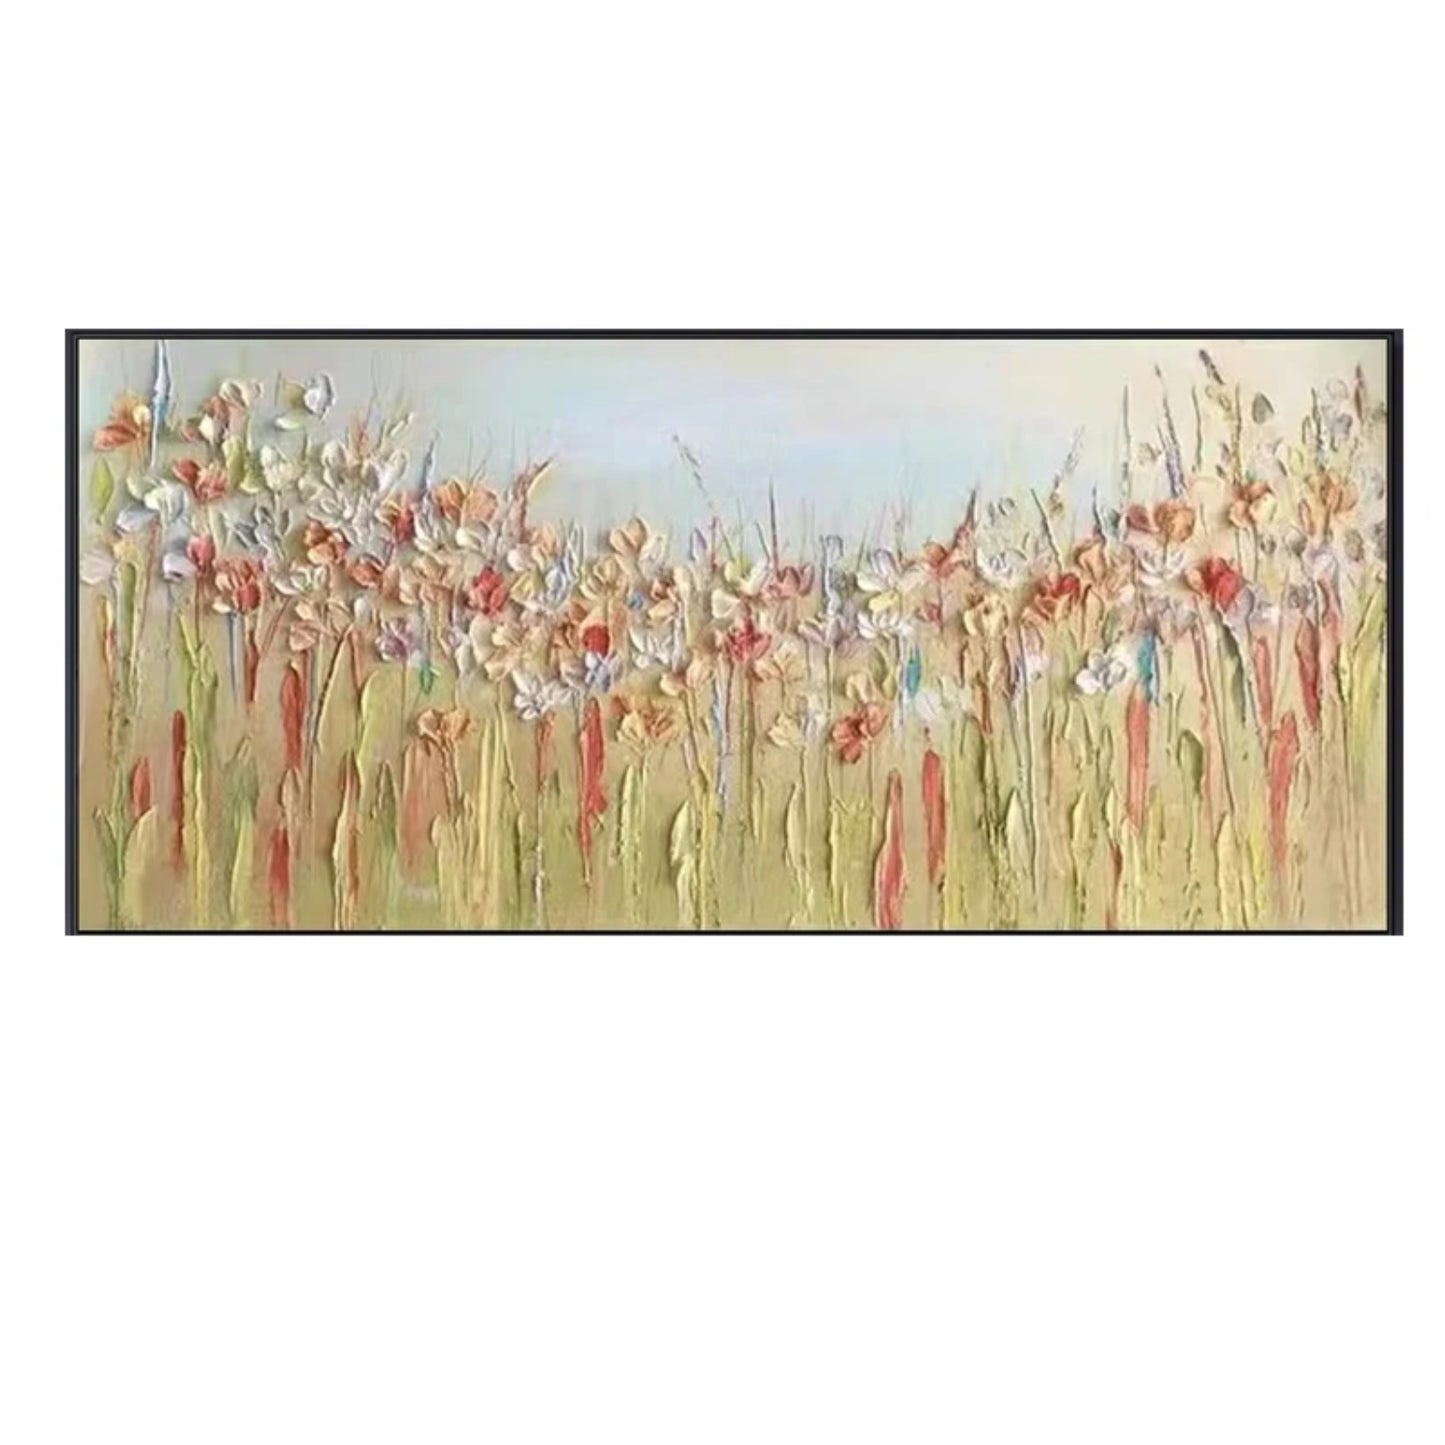 3D Textured Field of Wildflowers Stunning Painting